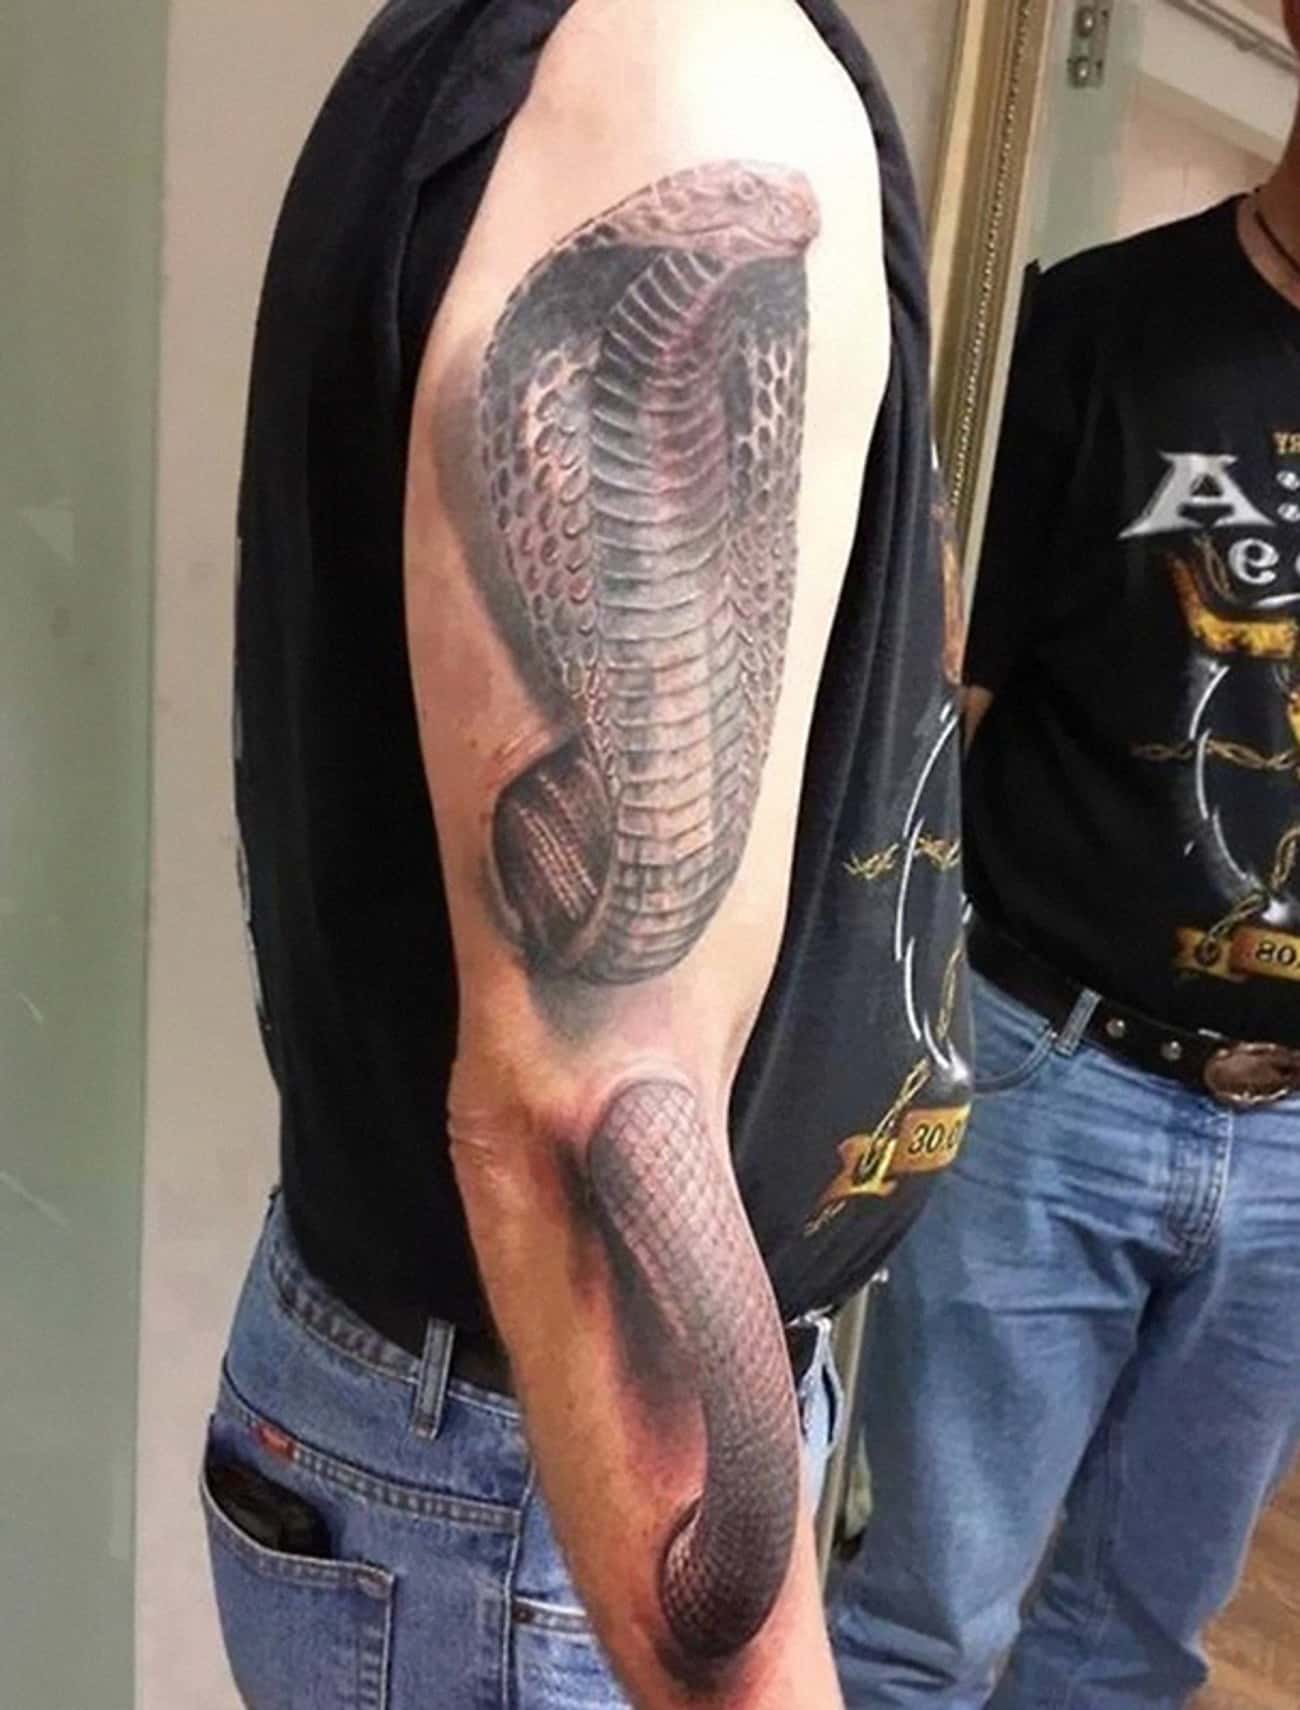 His Arm Looks Like It Could Actually Inject You with Venom